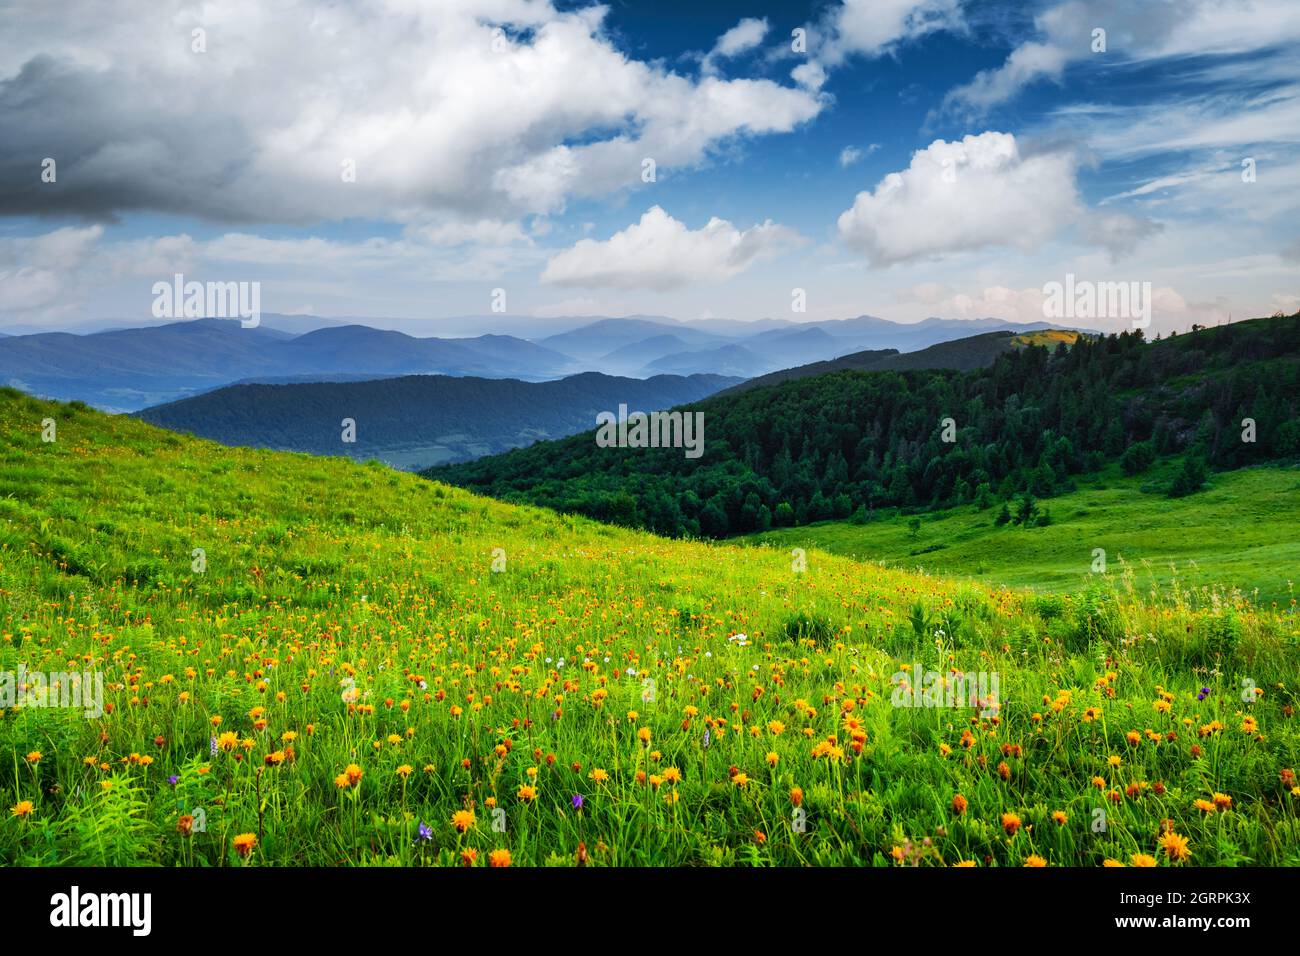 Amazing scene in summer mountains. Lush green grassy meadows in fantastic evening sunlight. Carpathians, Europe. Landscape photography Stock Photo